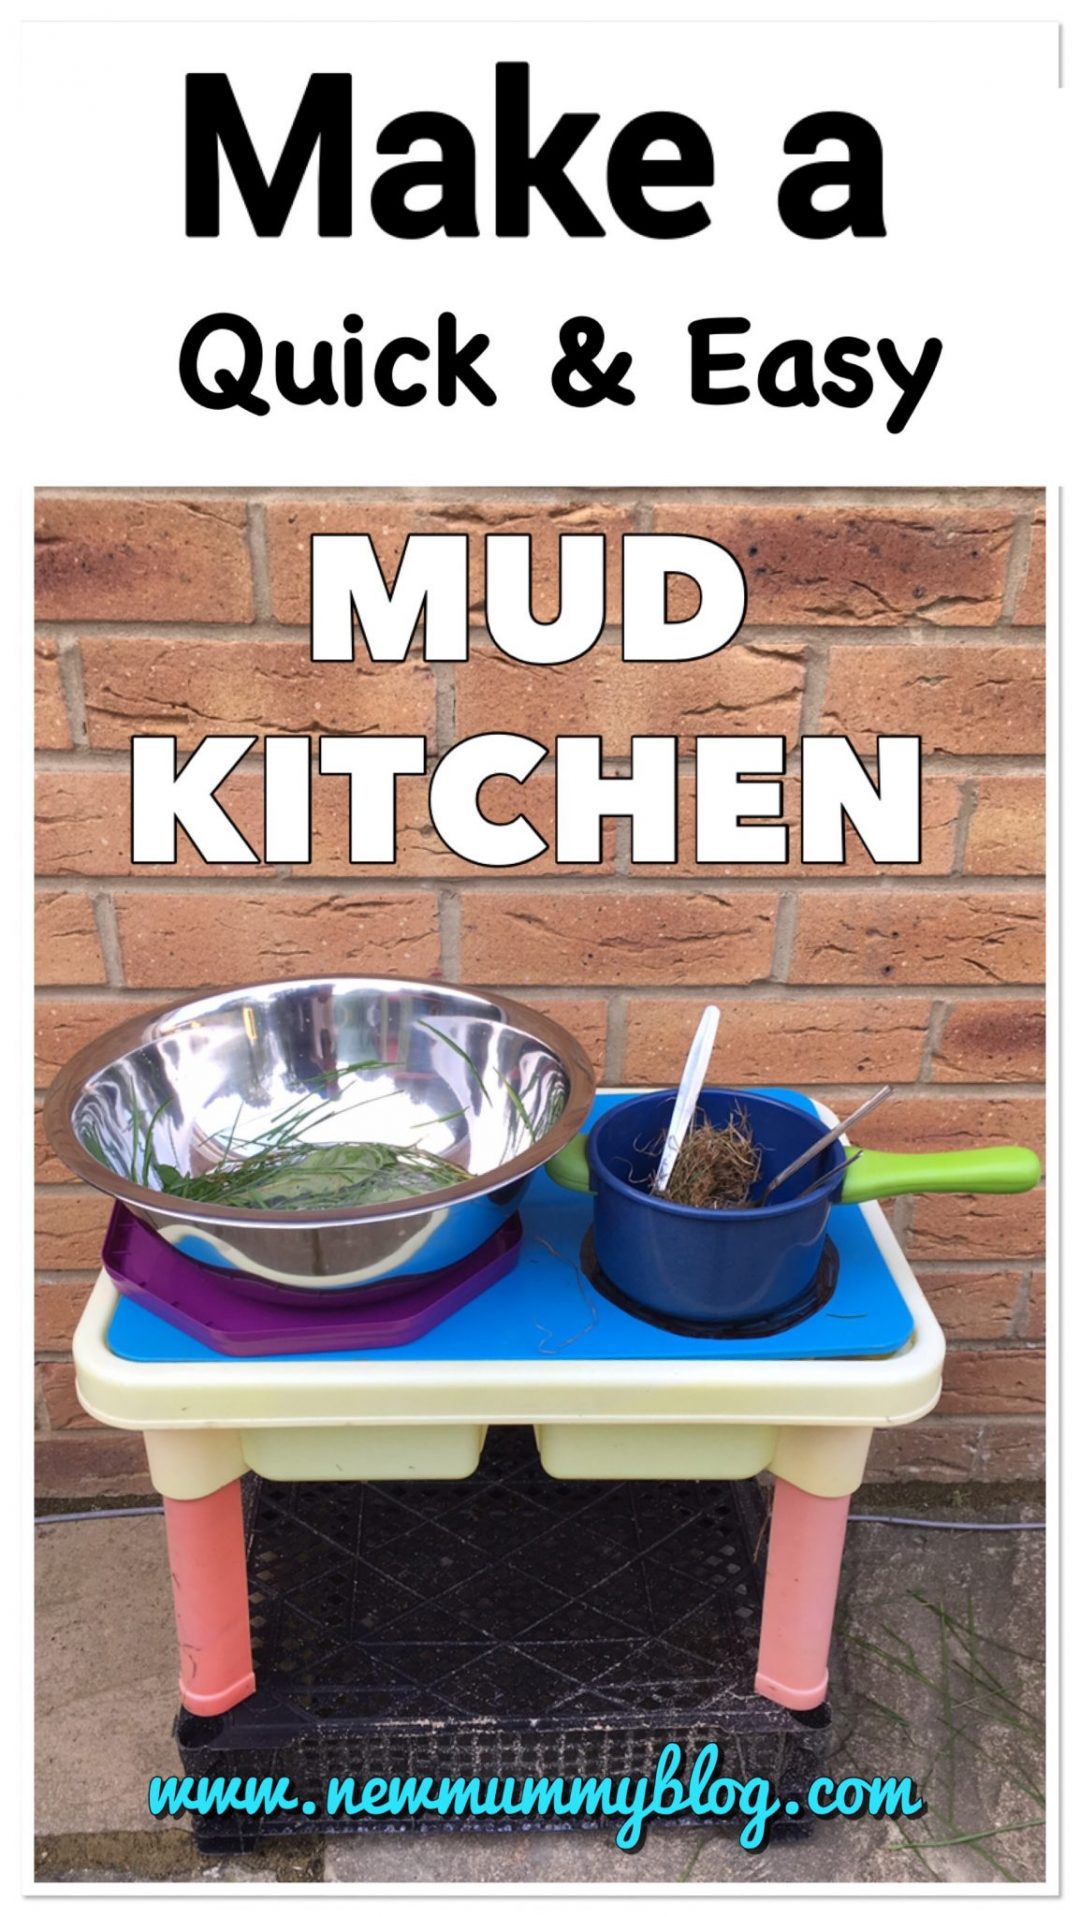 How to make a mud kitchen cheaply, quickly and easily on New Mummy Blog Toddler Activities for the Garden 